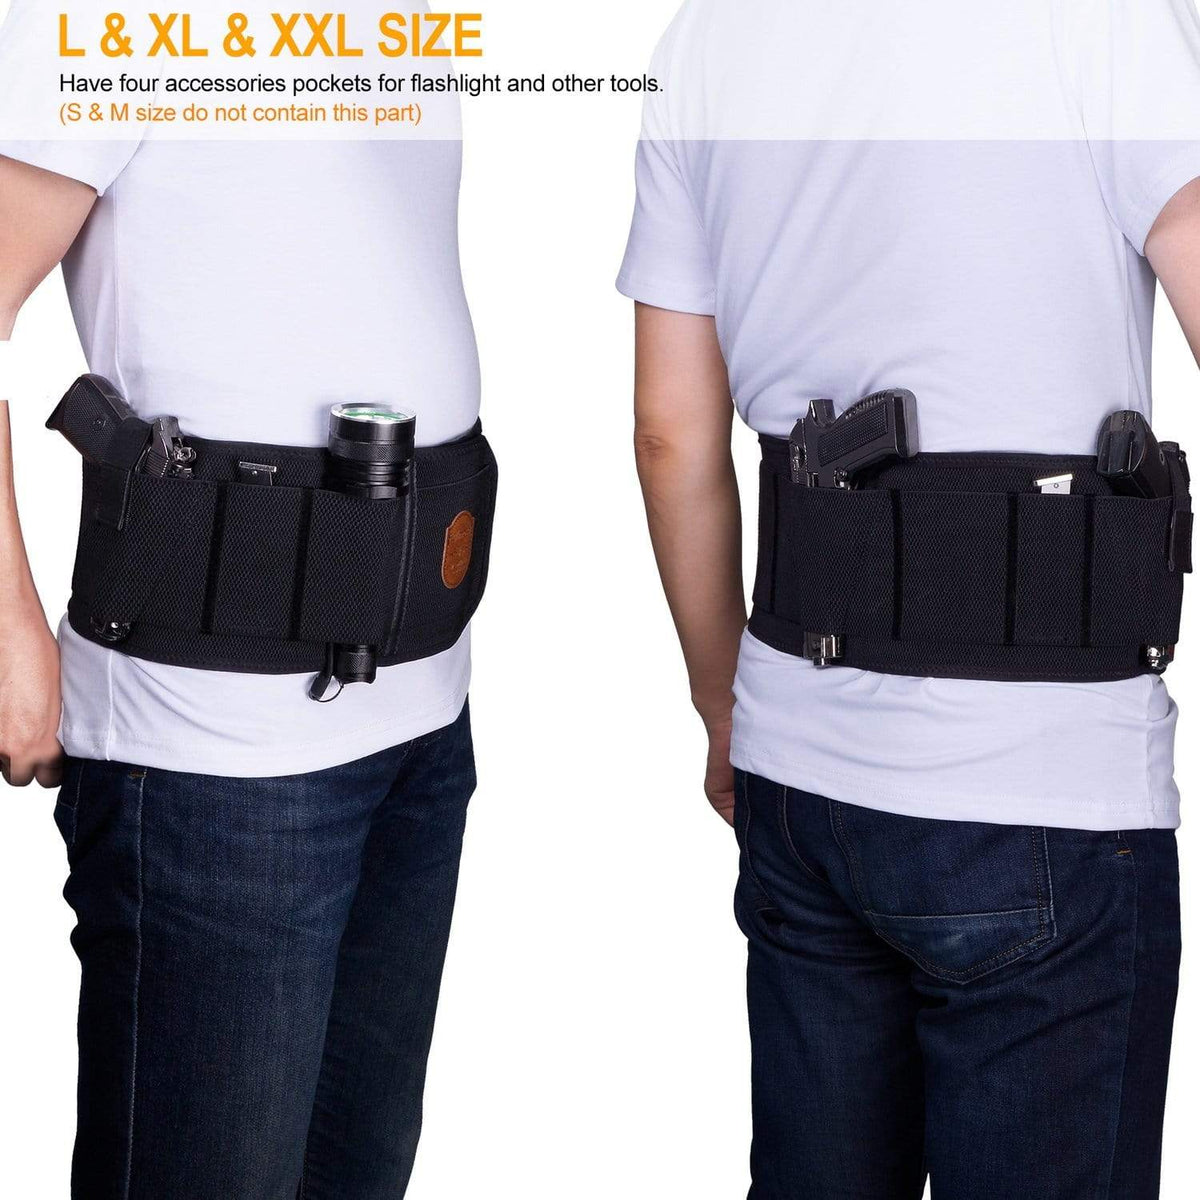 Dropship Belly Band Gun Holster Adjustable Waist Carry Tactical Pistol  Pouch Breathable Neoprene Gun Belt Bag to Sell Online at a Lower Price